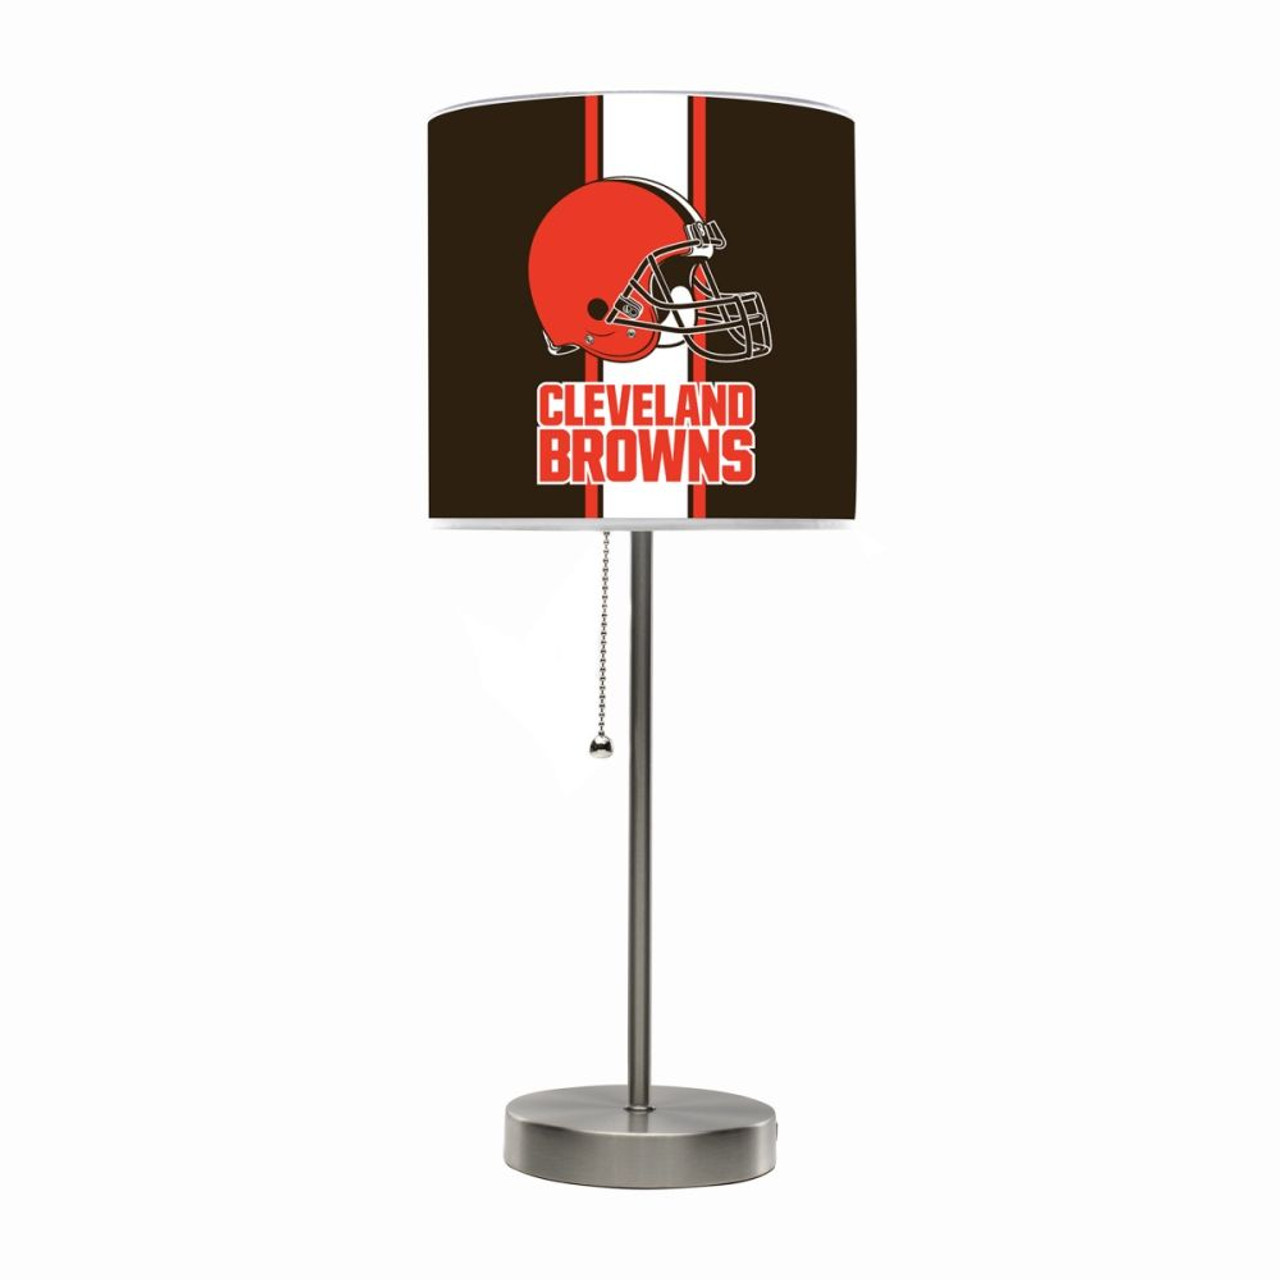 Cleveland, Cle, Browns, 19", Tall, Chrome, Table, Desk, Lamp, 609-1020, Imperial, NFL